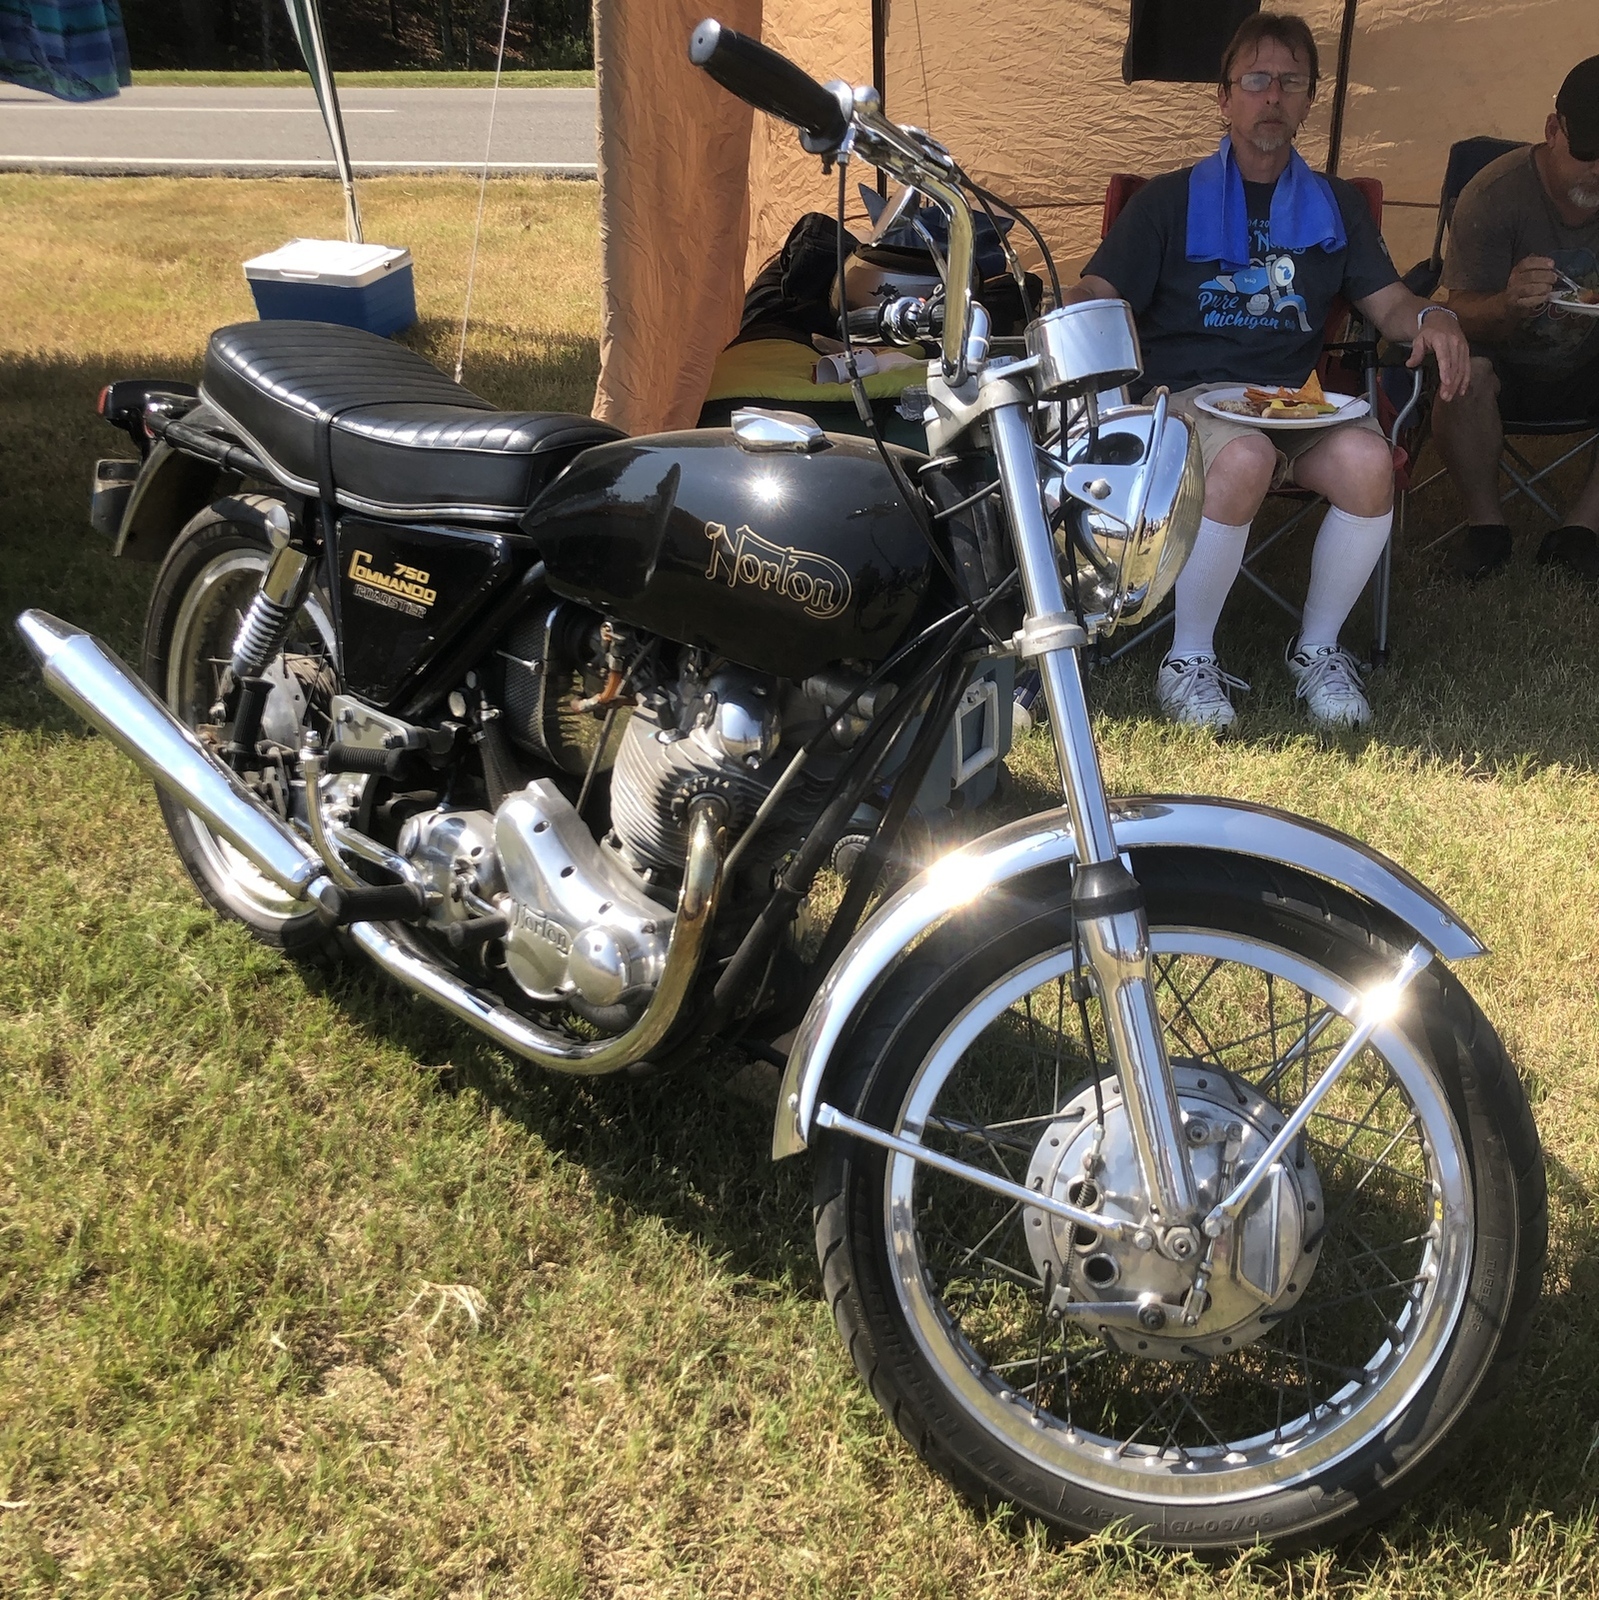 "Turn 6" at 15th Annual Barber Vintage Festival - Oct. 5, 2019